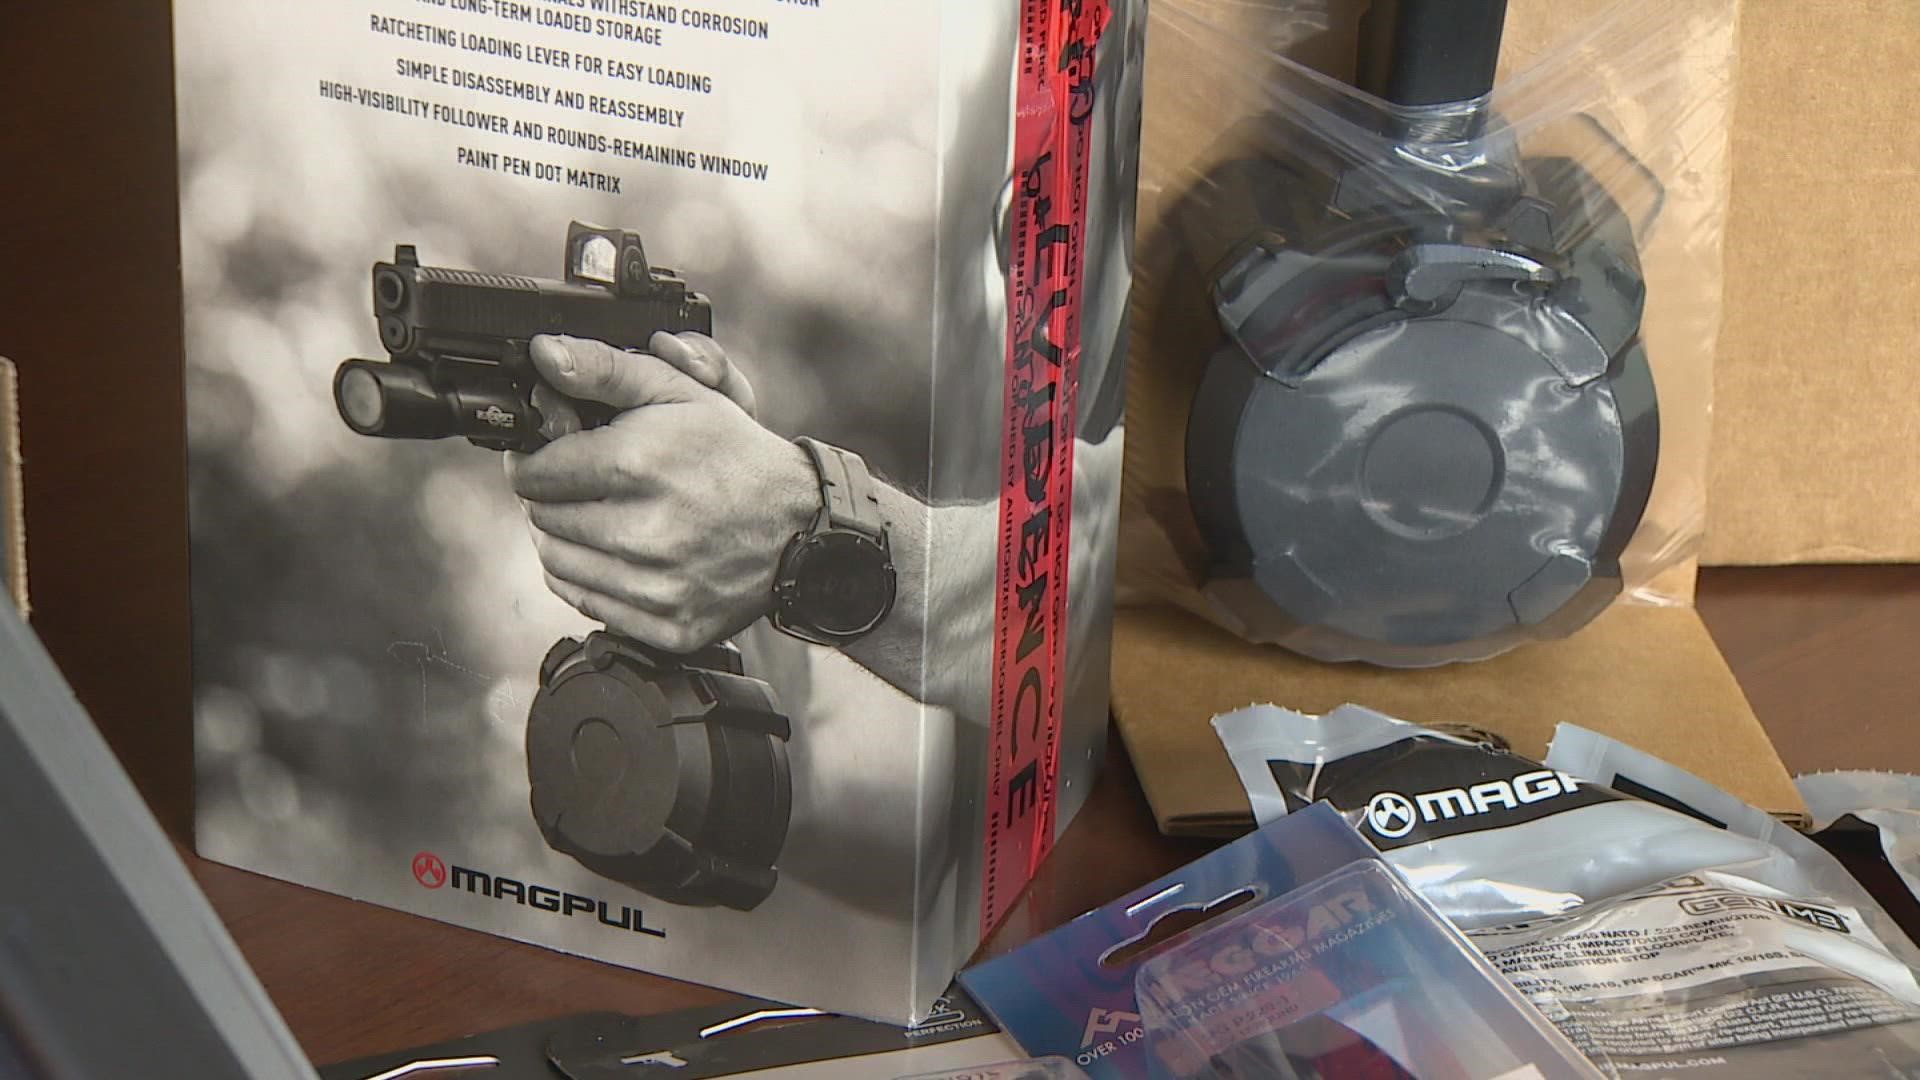 The sale of ammunition magazines that hold more than 10 rounds was banned in the state in July.